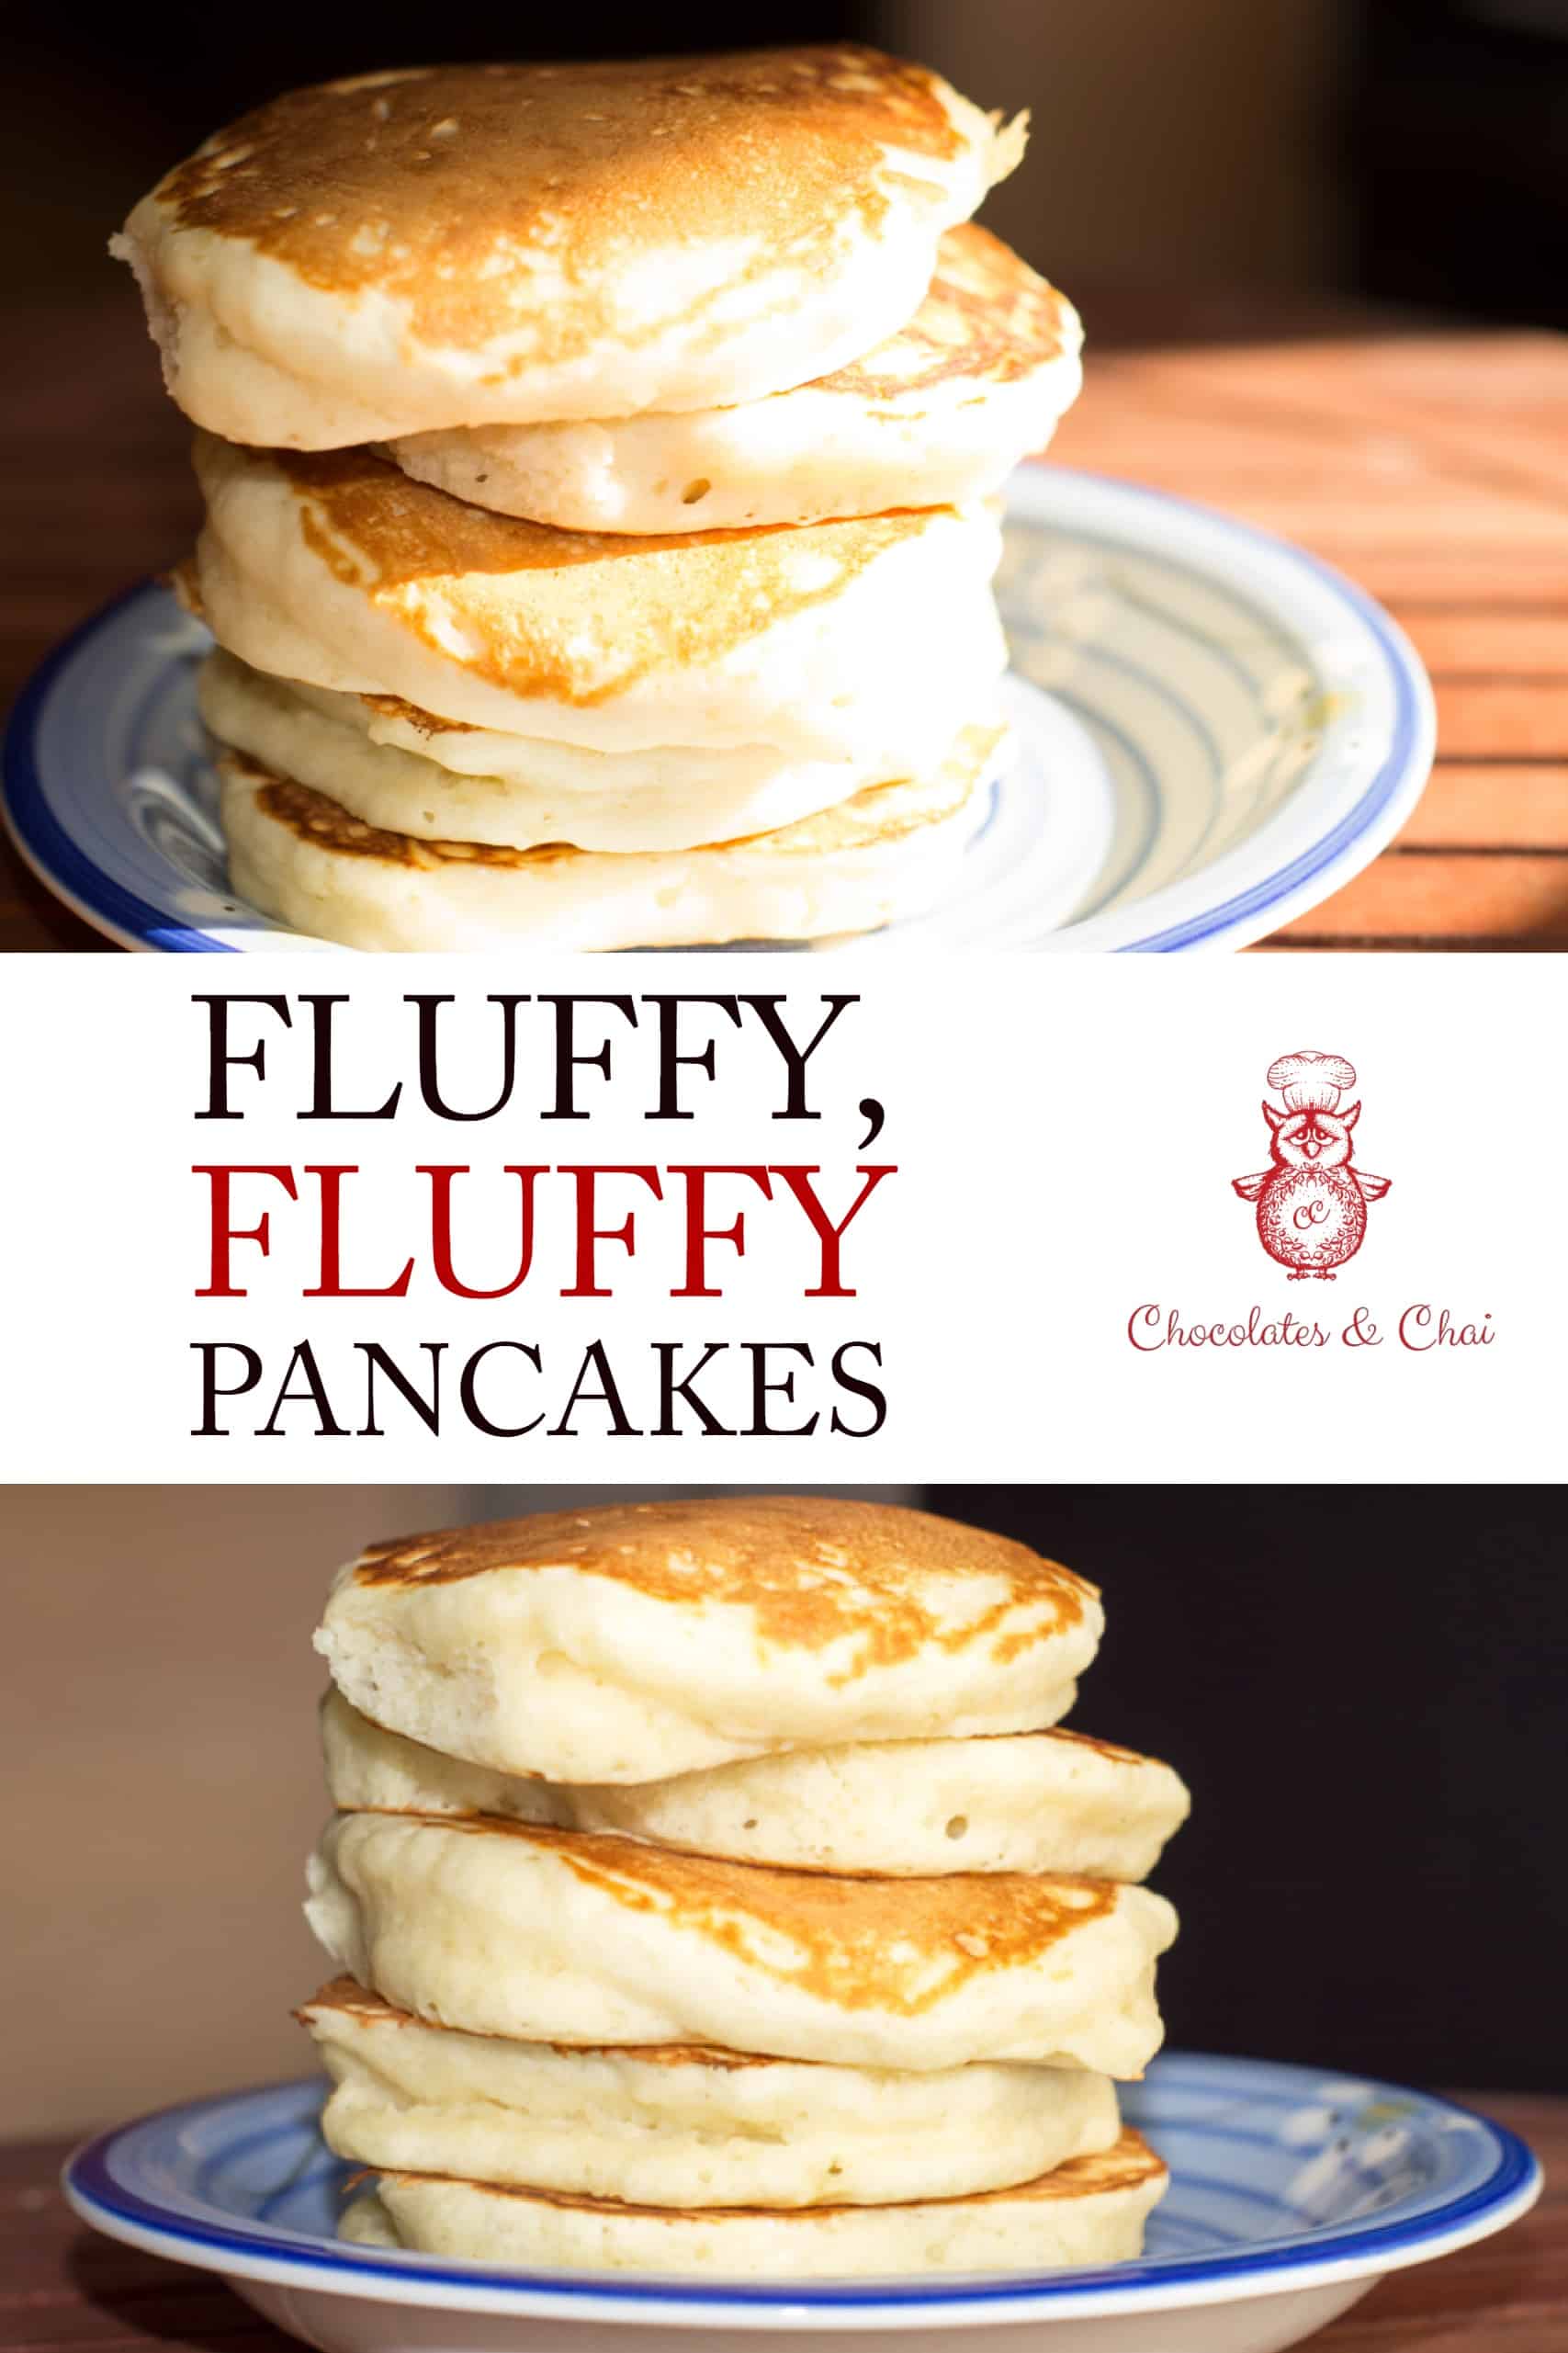 A Pinterest-optimised image with two photos of the fluffy pancakes stacked on plates, separated by text.